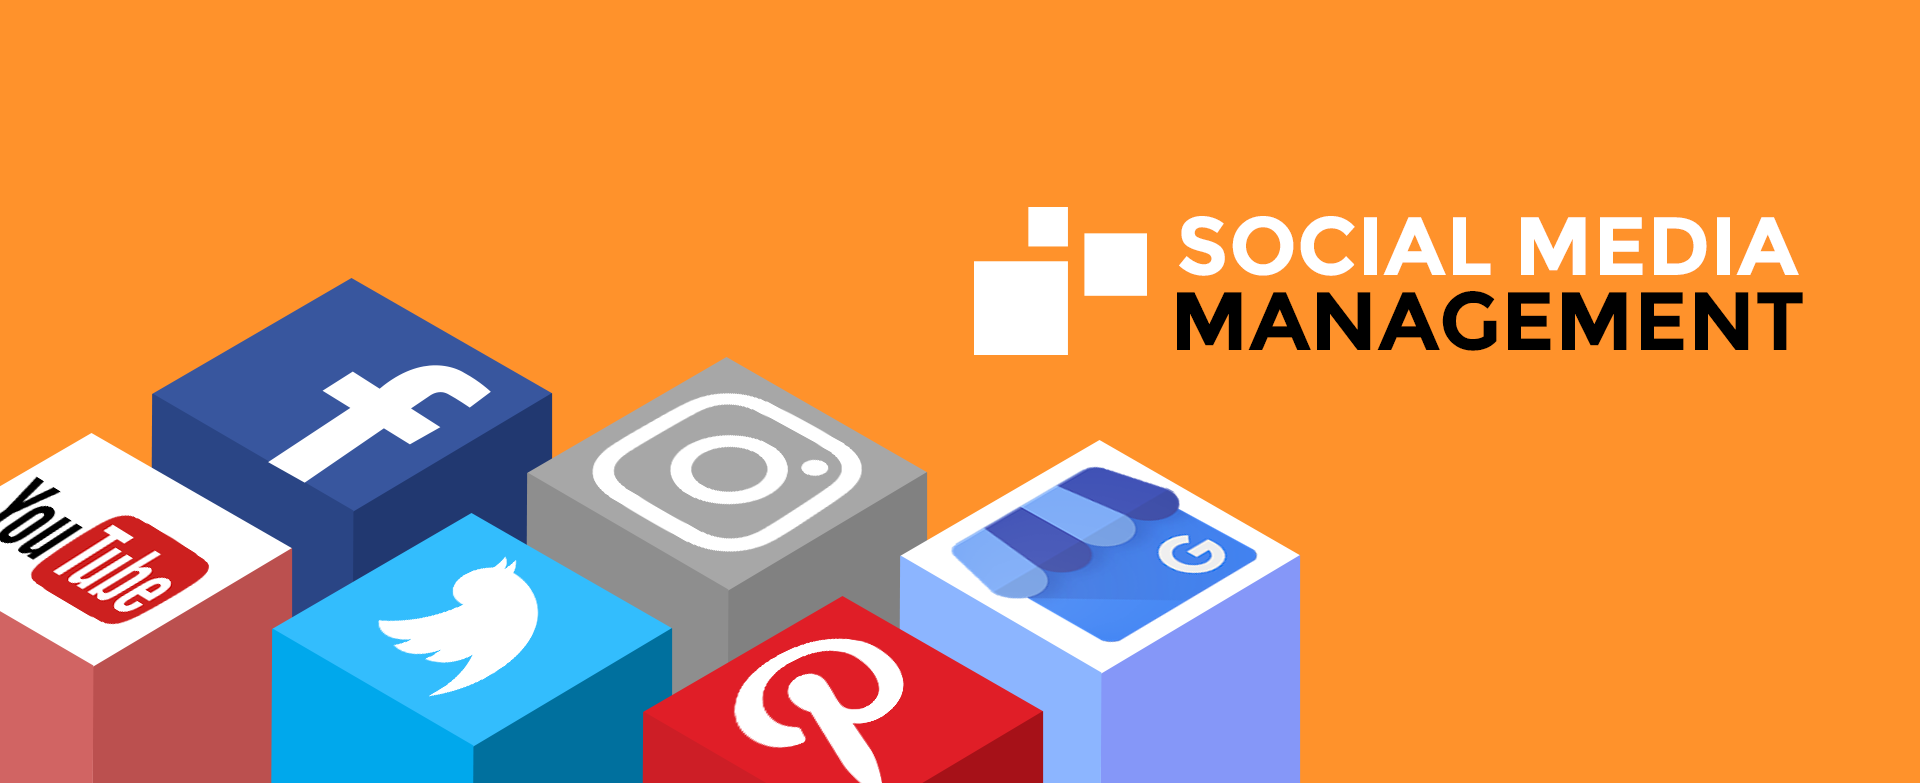 How To Get Started In Social Media Management